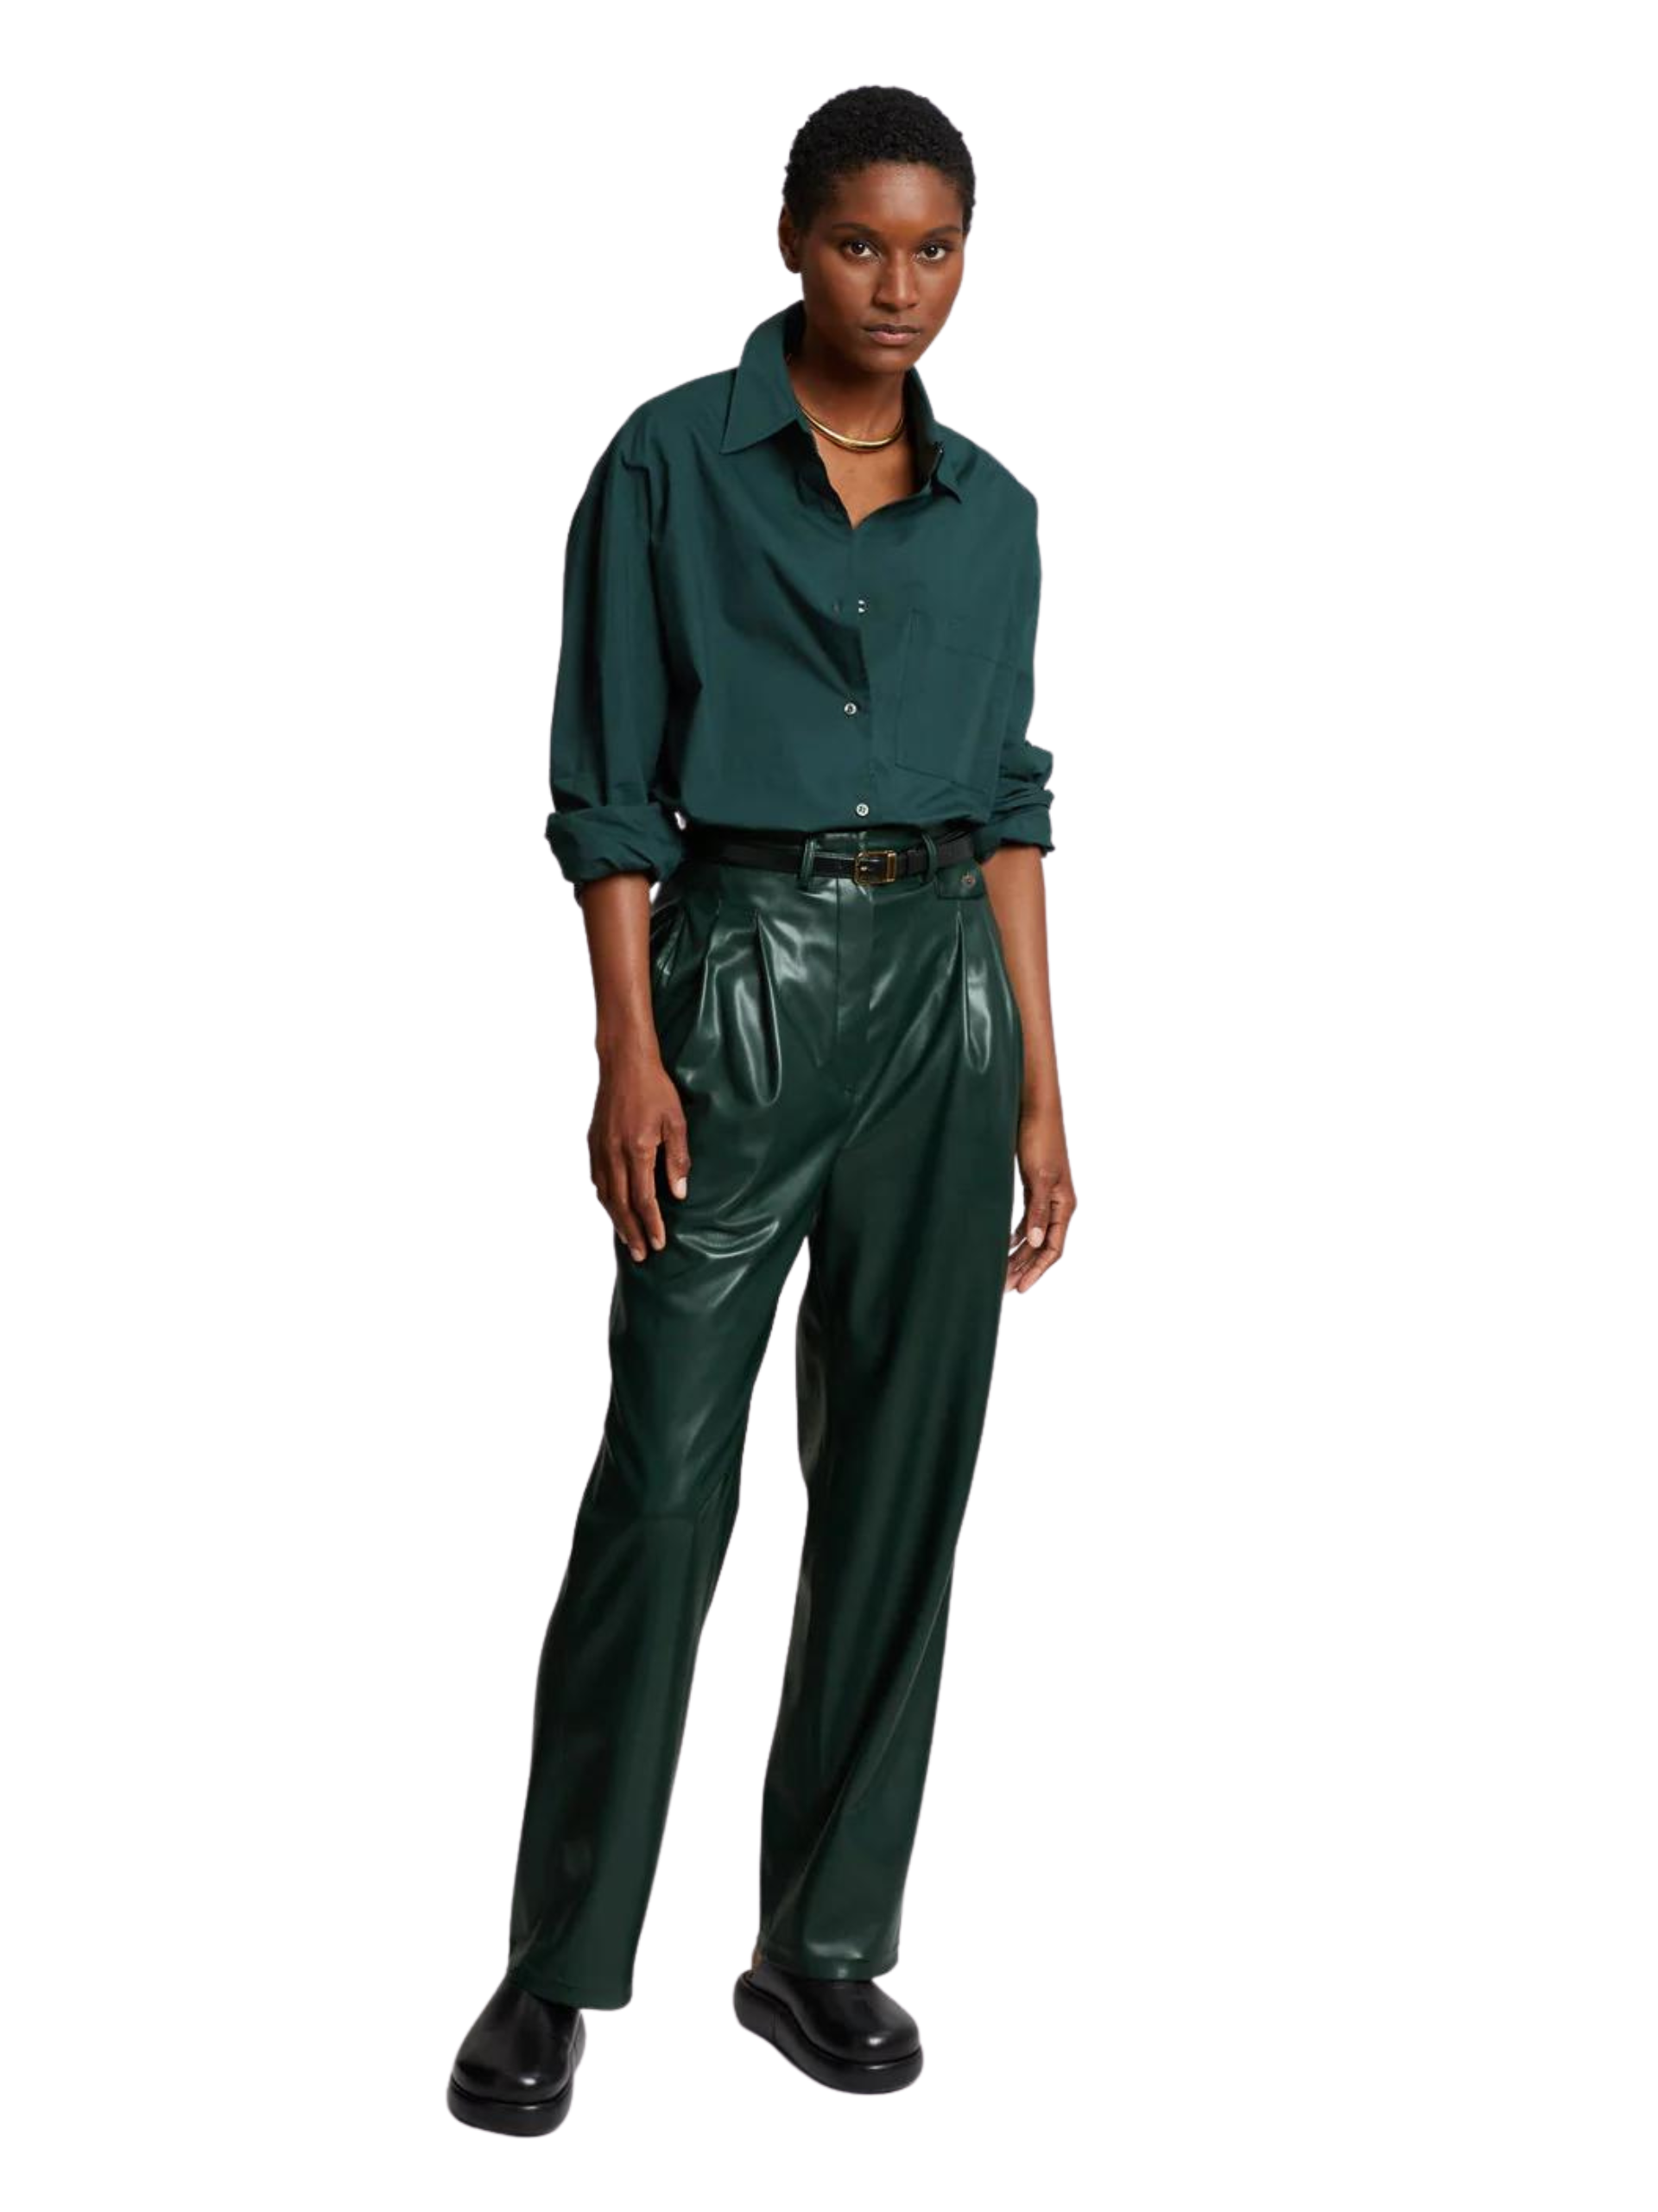 Pernille Faux Leather Pants / Bottle Green - Seletti Concept Store